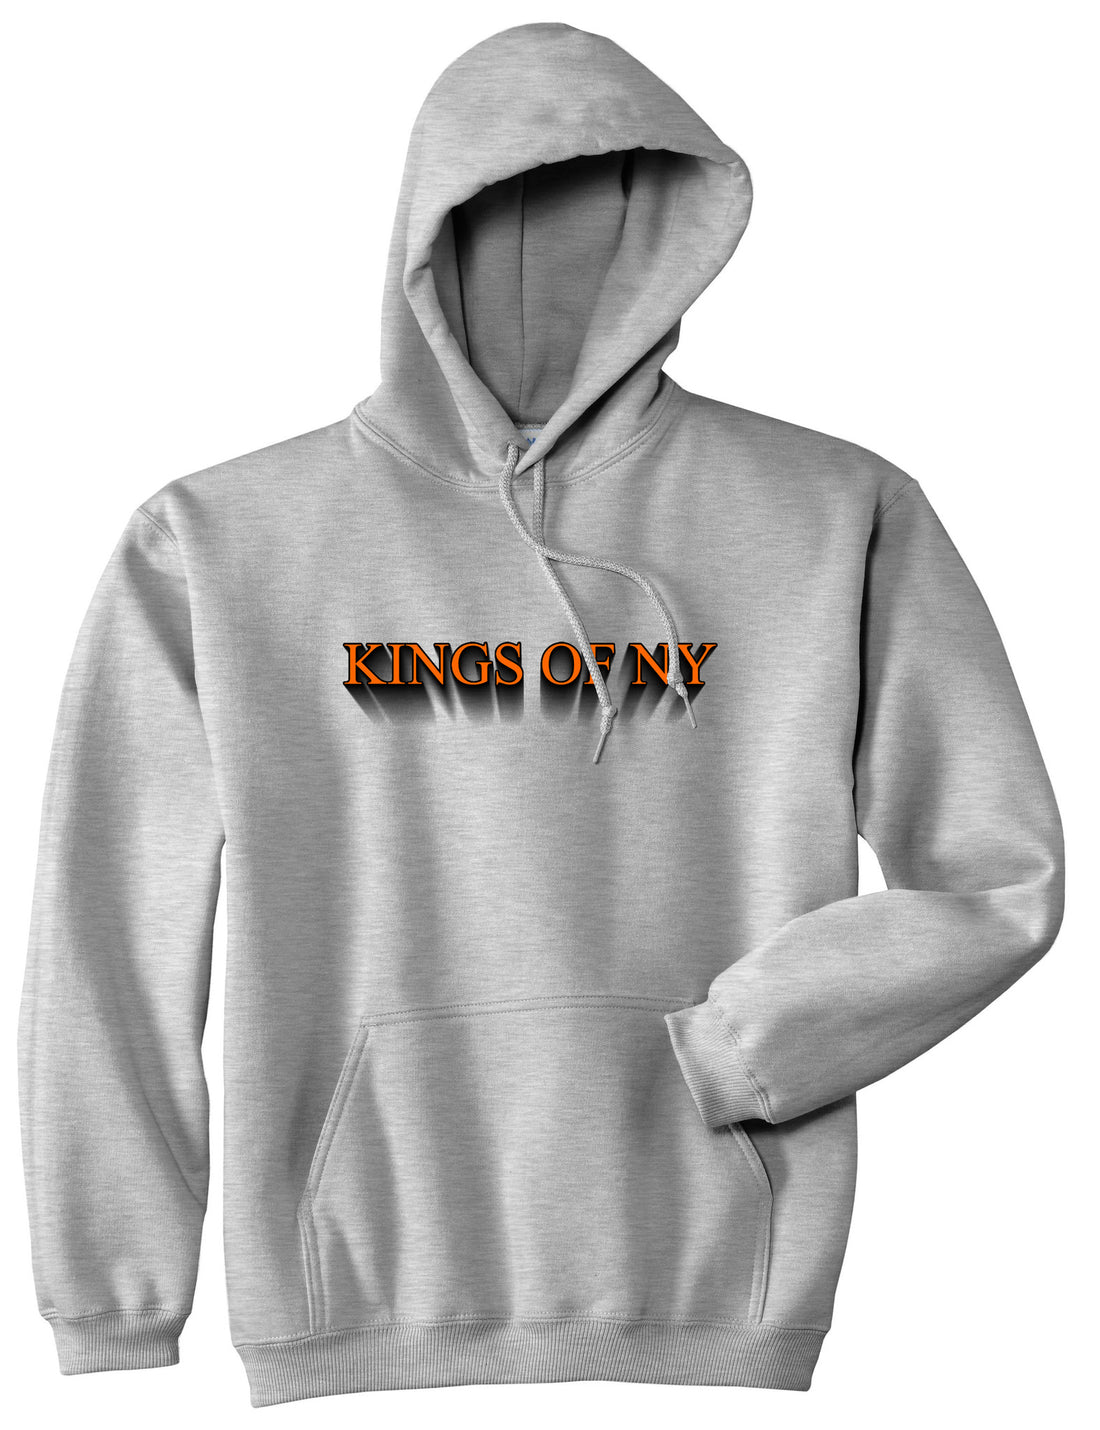 3D Text Pullover Hoodie in Grey